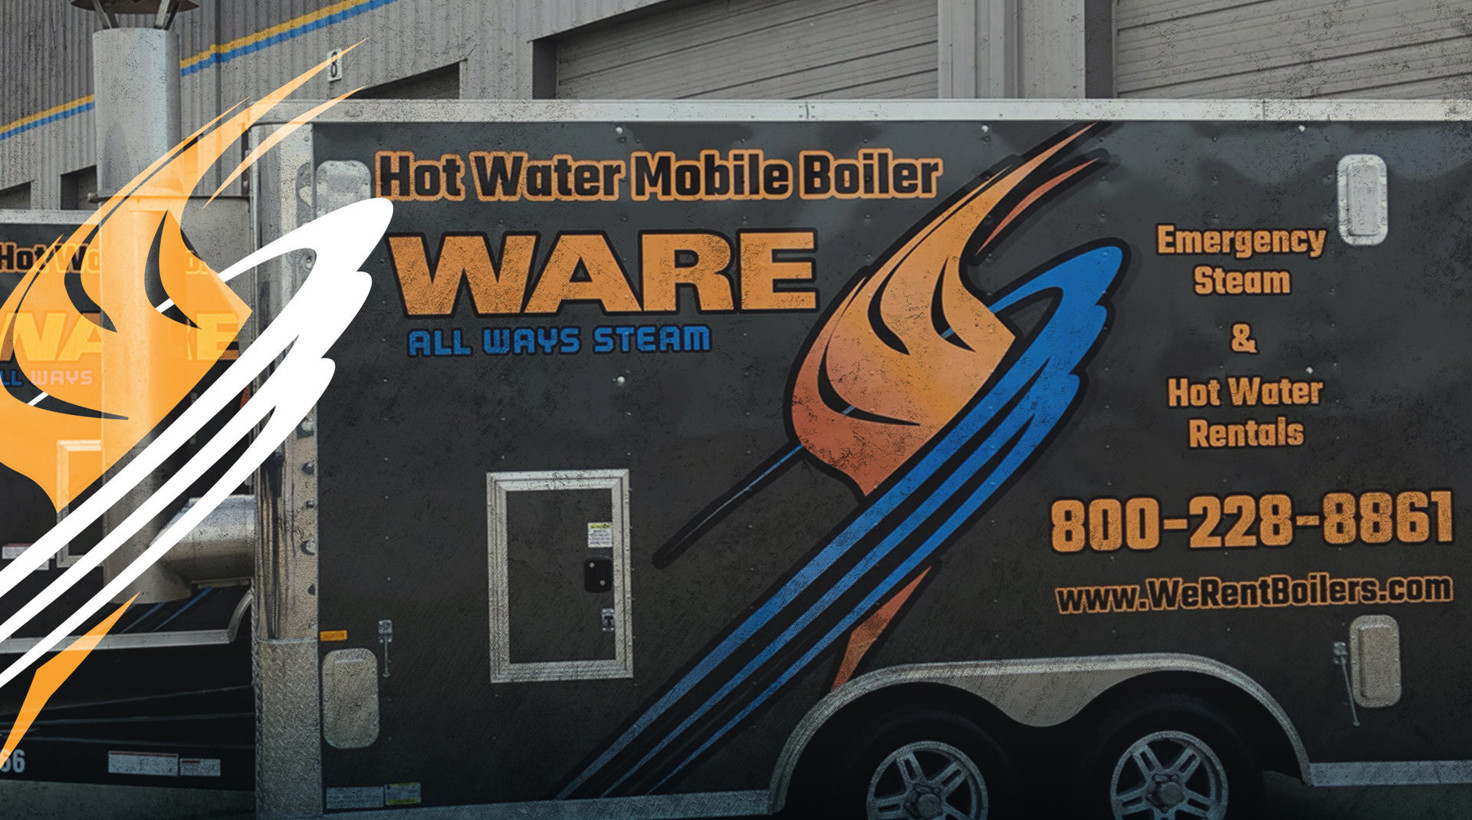 Let’s Talk About Hot Water Boilers